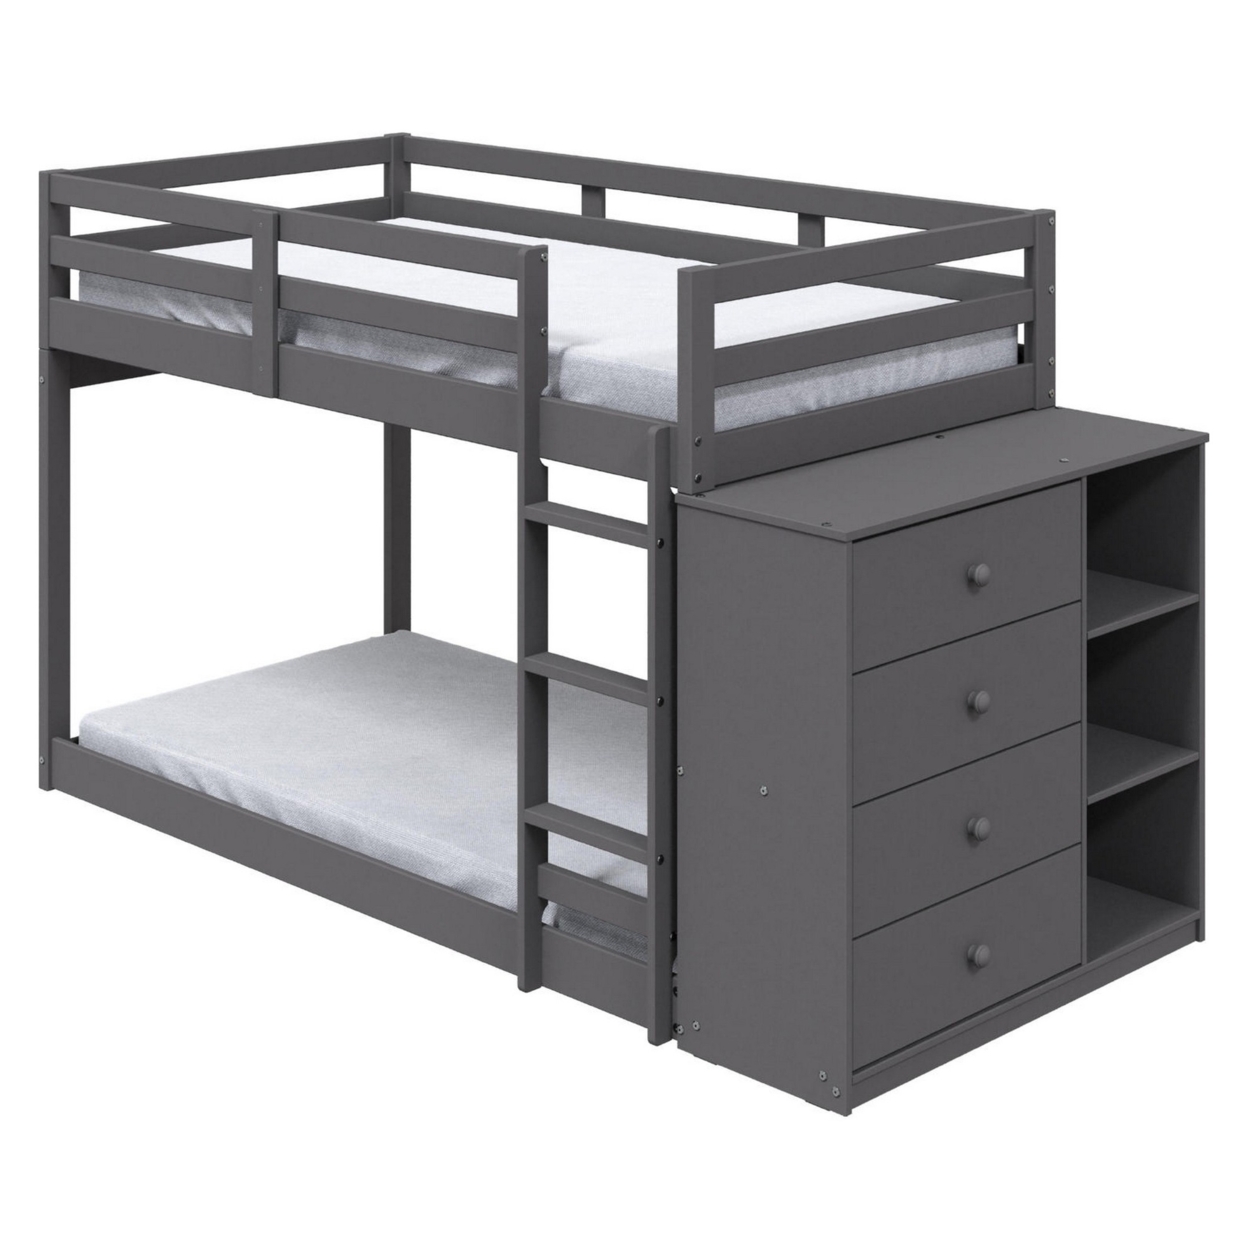 Classic Twin Bunk Bed With Cabinet, 4 Drawers, 3 Compartments, Ladder, Gray- Saltoro Sherpi